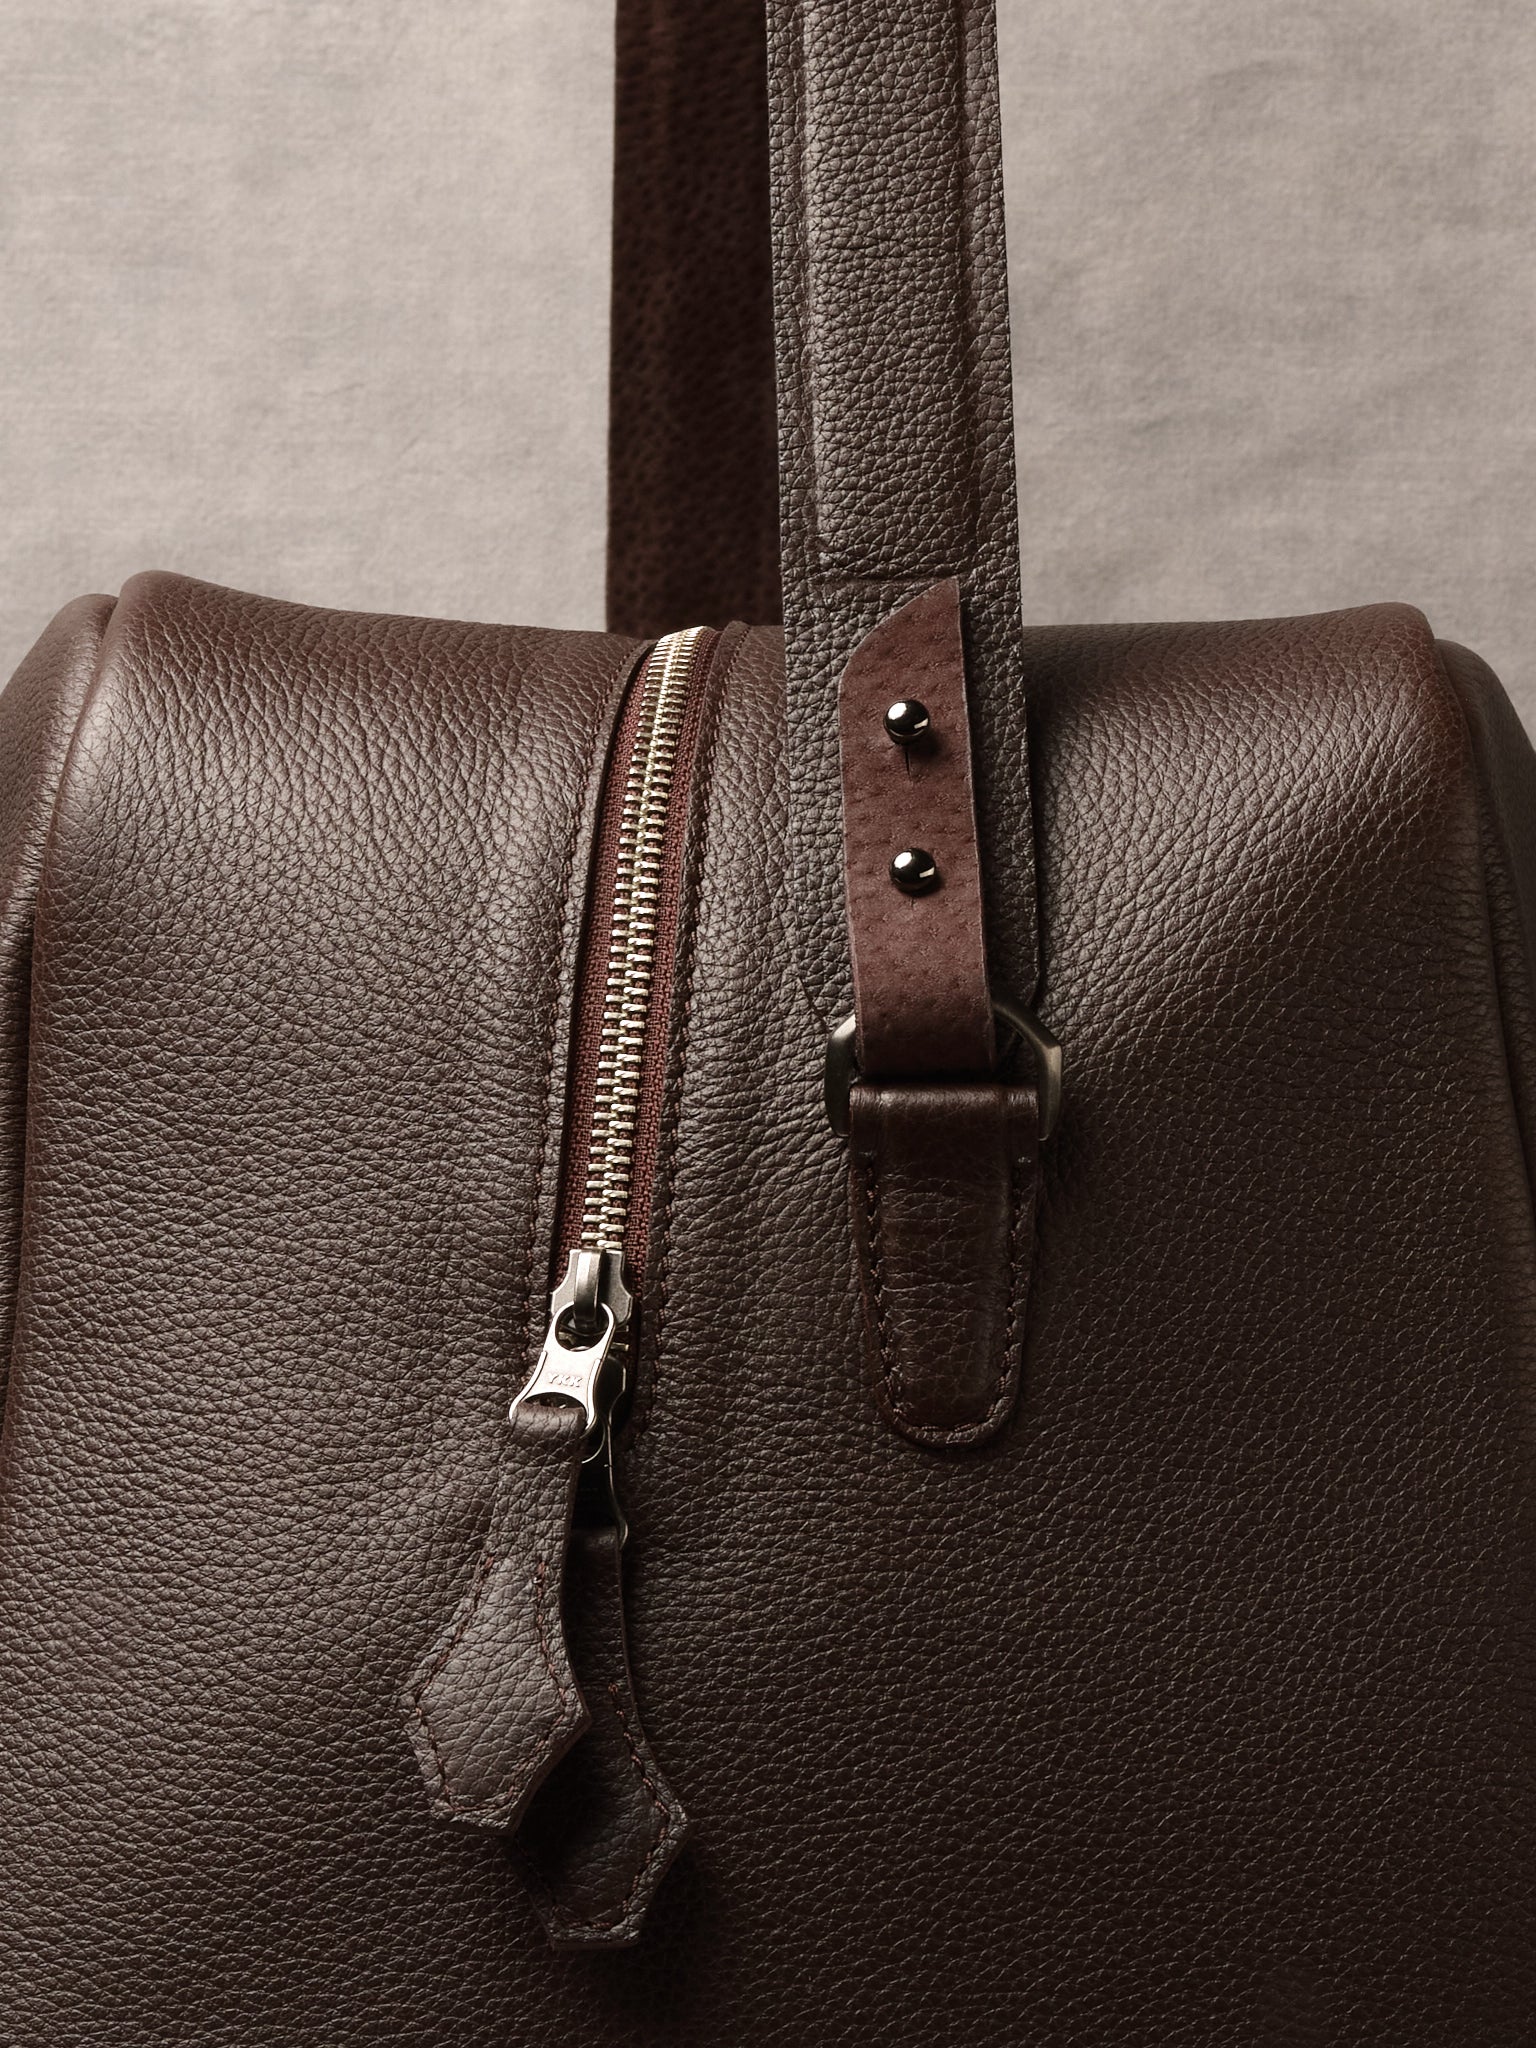 Removable Shoulder Strap. Large Duffle Bag Dark Brown by Capra Leather